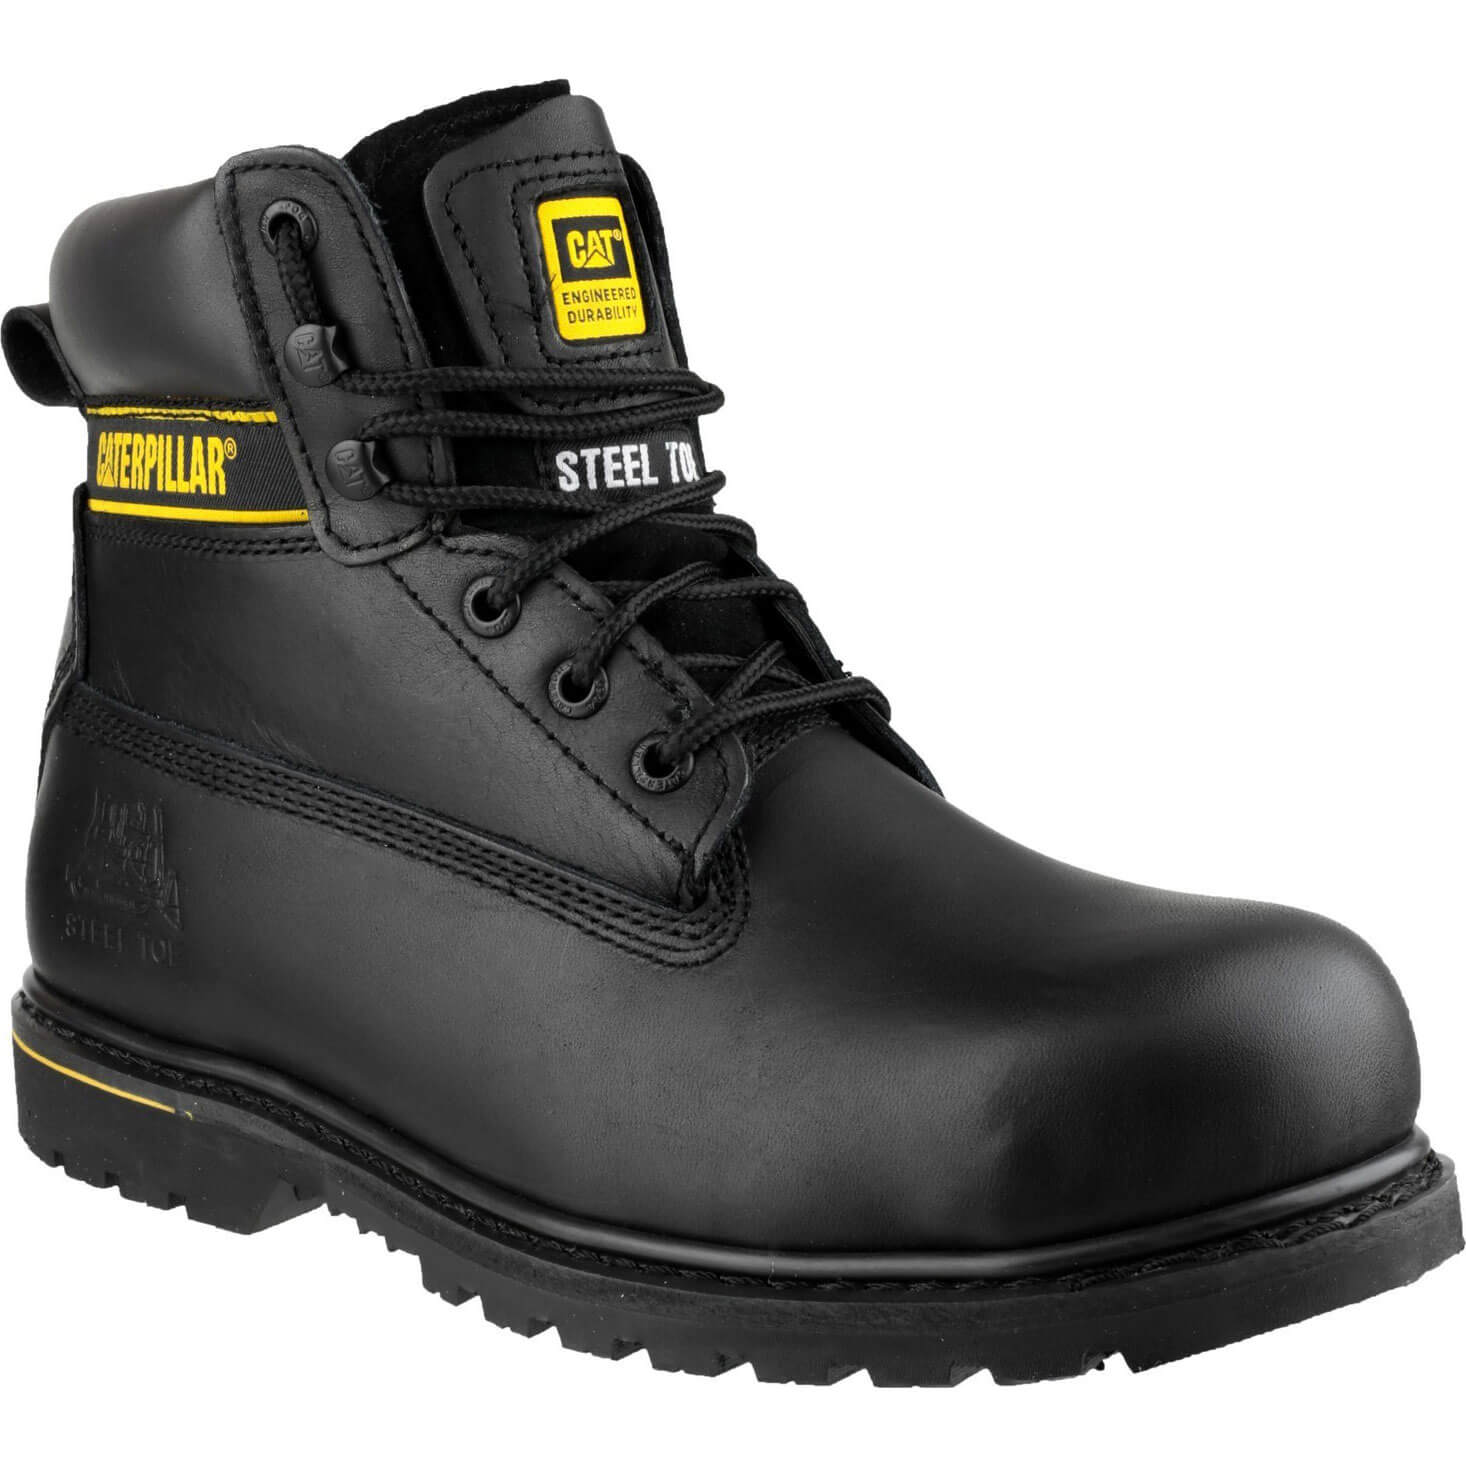 Caterpillar Mens Holton Safety Boots Black Size 10